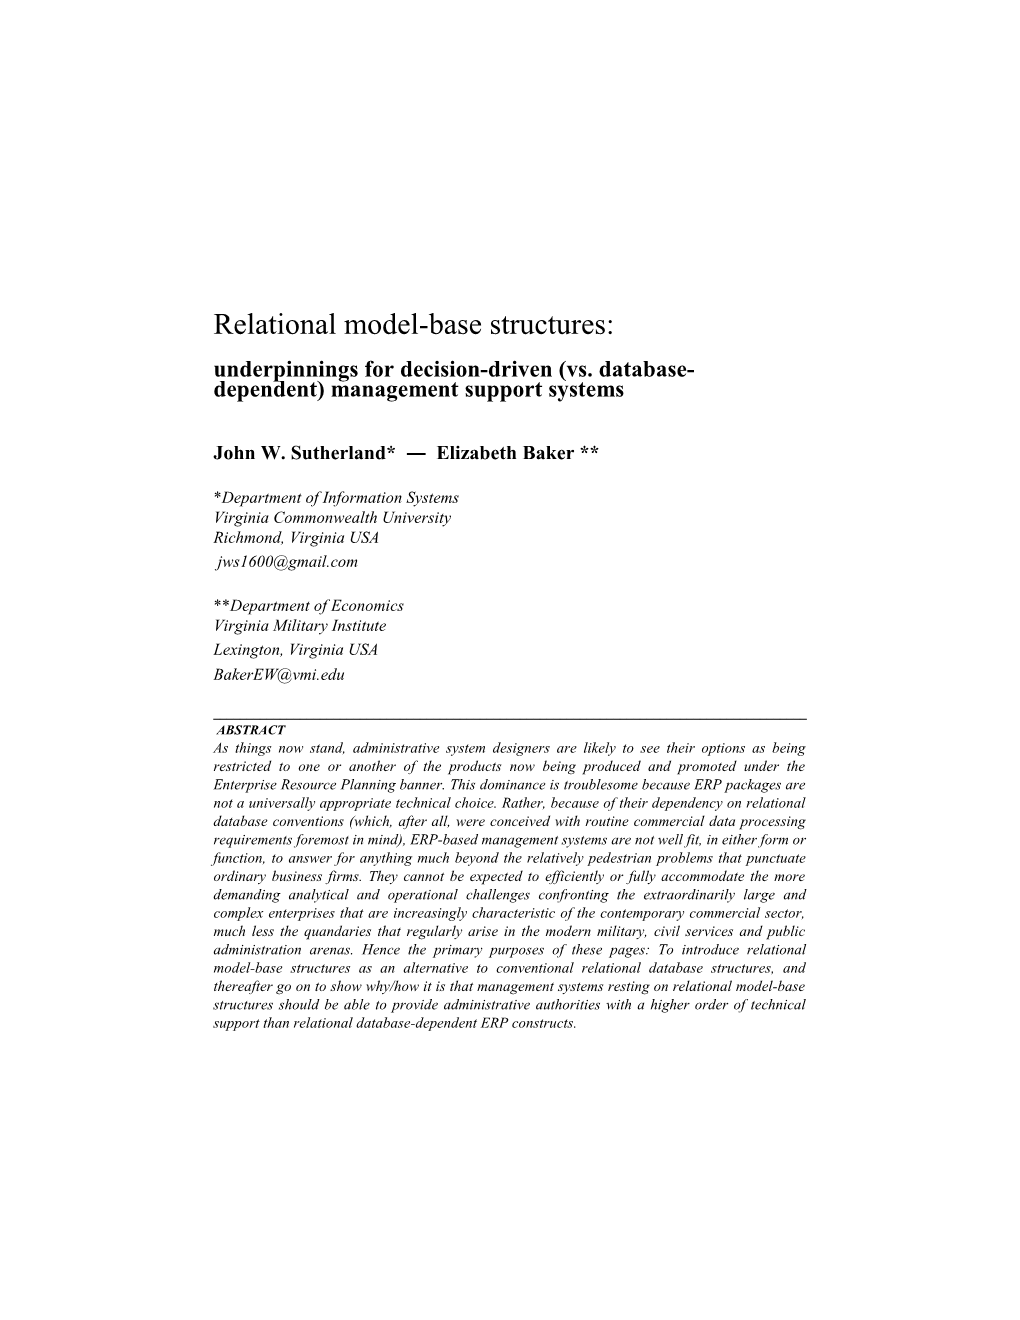 Relational Model-Base Structures: Expediting the Automation of Management